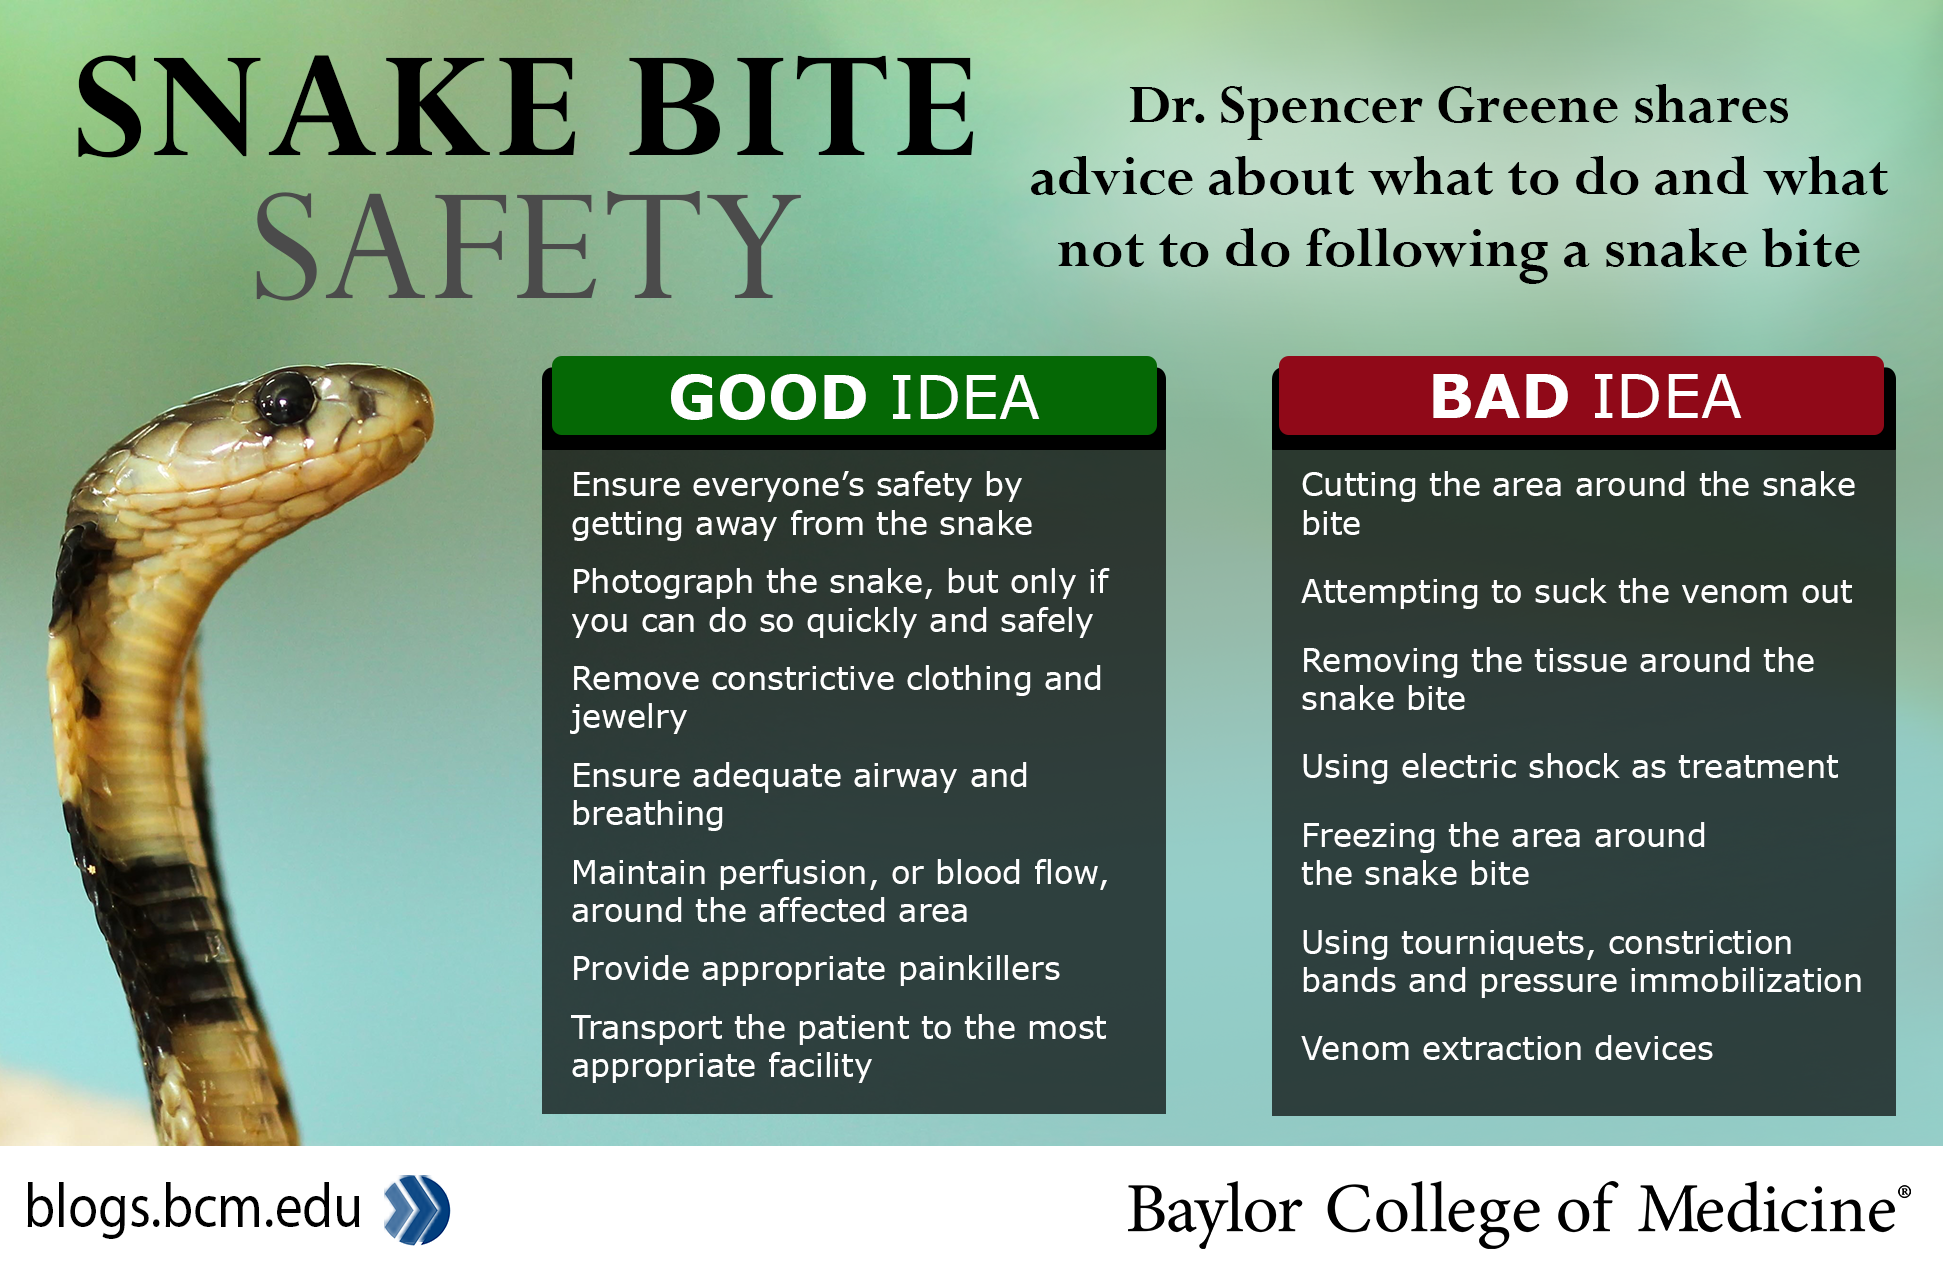 Snake Bite Safety.  Dr. Spencer Greene shares advice about what to do and what not to do following a snake bite.  Good Idea.  Ensure everyone’s safety by getting away from the snake. Photograph the snake, but only if you can do so quickly and safely. Remove constrictive clothing and jewelry. Ensure adequate airway and breathing. Maintain perfusion, or blood flow, around the affected area. Provide appropriate painkillers. Transport the patient to the most appropriate facility.  Bad Idea. Cutting the area around the snake bite. Attempting to suck the venom out. Removing the tissue around the snake bite. Using electric shock as treatment. Freezing the area around the snake bite Using tourniquets, constriction bands and pressure immobilization. Venom extraction devices.